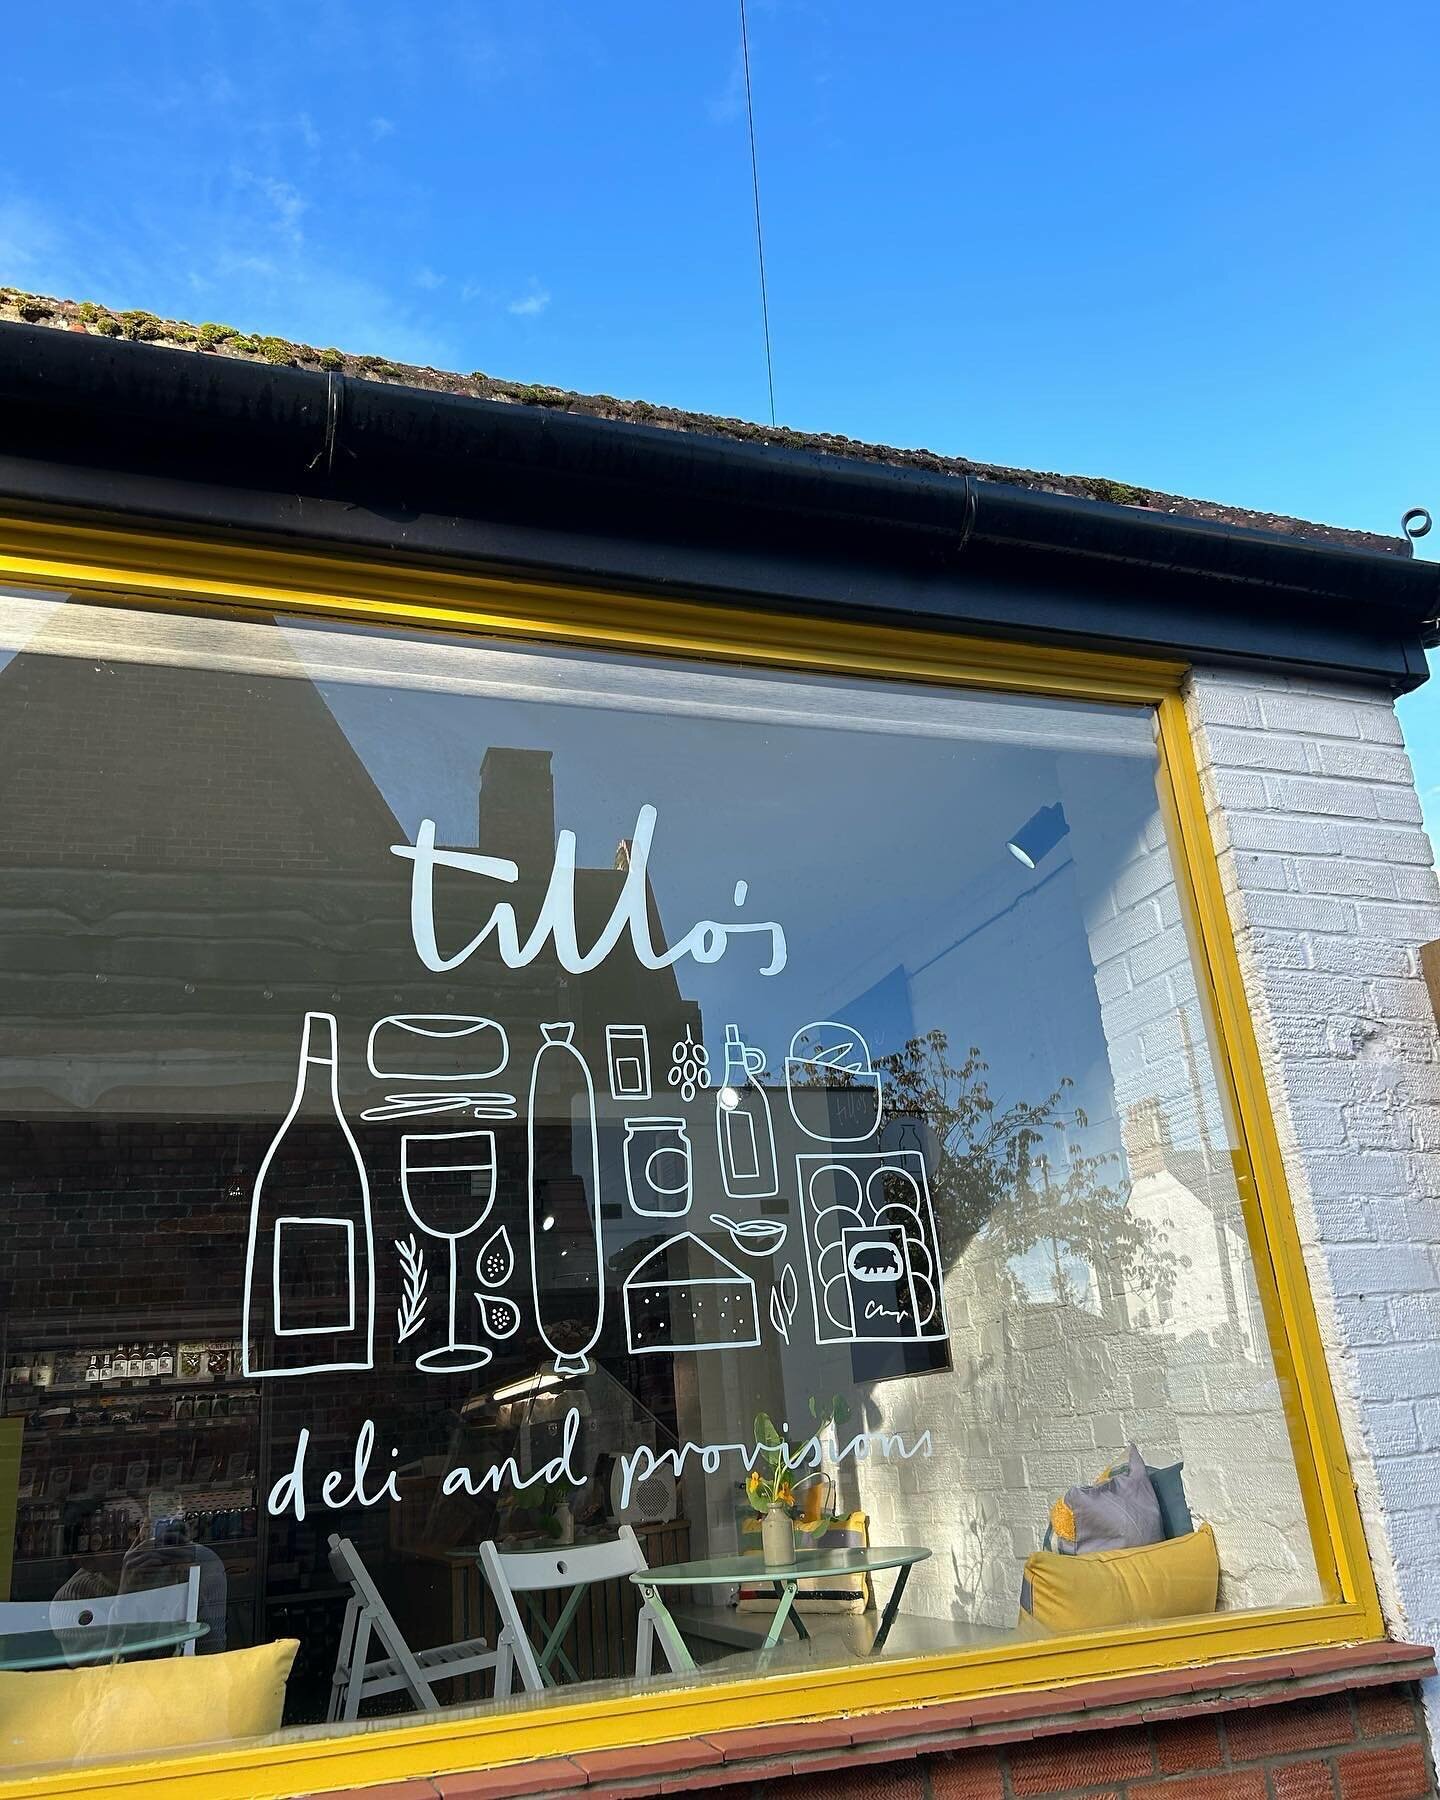 EASTER OPENING HOURS

Thursday | 9 - 4
Good Friday | 9 - 4
Saturday | 9 - 4

Probably could have just said that we&rsquo;re open as normal&hellip;..

🐰 
&bull;
&bull;
&bull;
&bull;
&bull;
#tillosdeli #tillos #oultonbroaddeli #oultonbroad